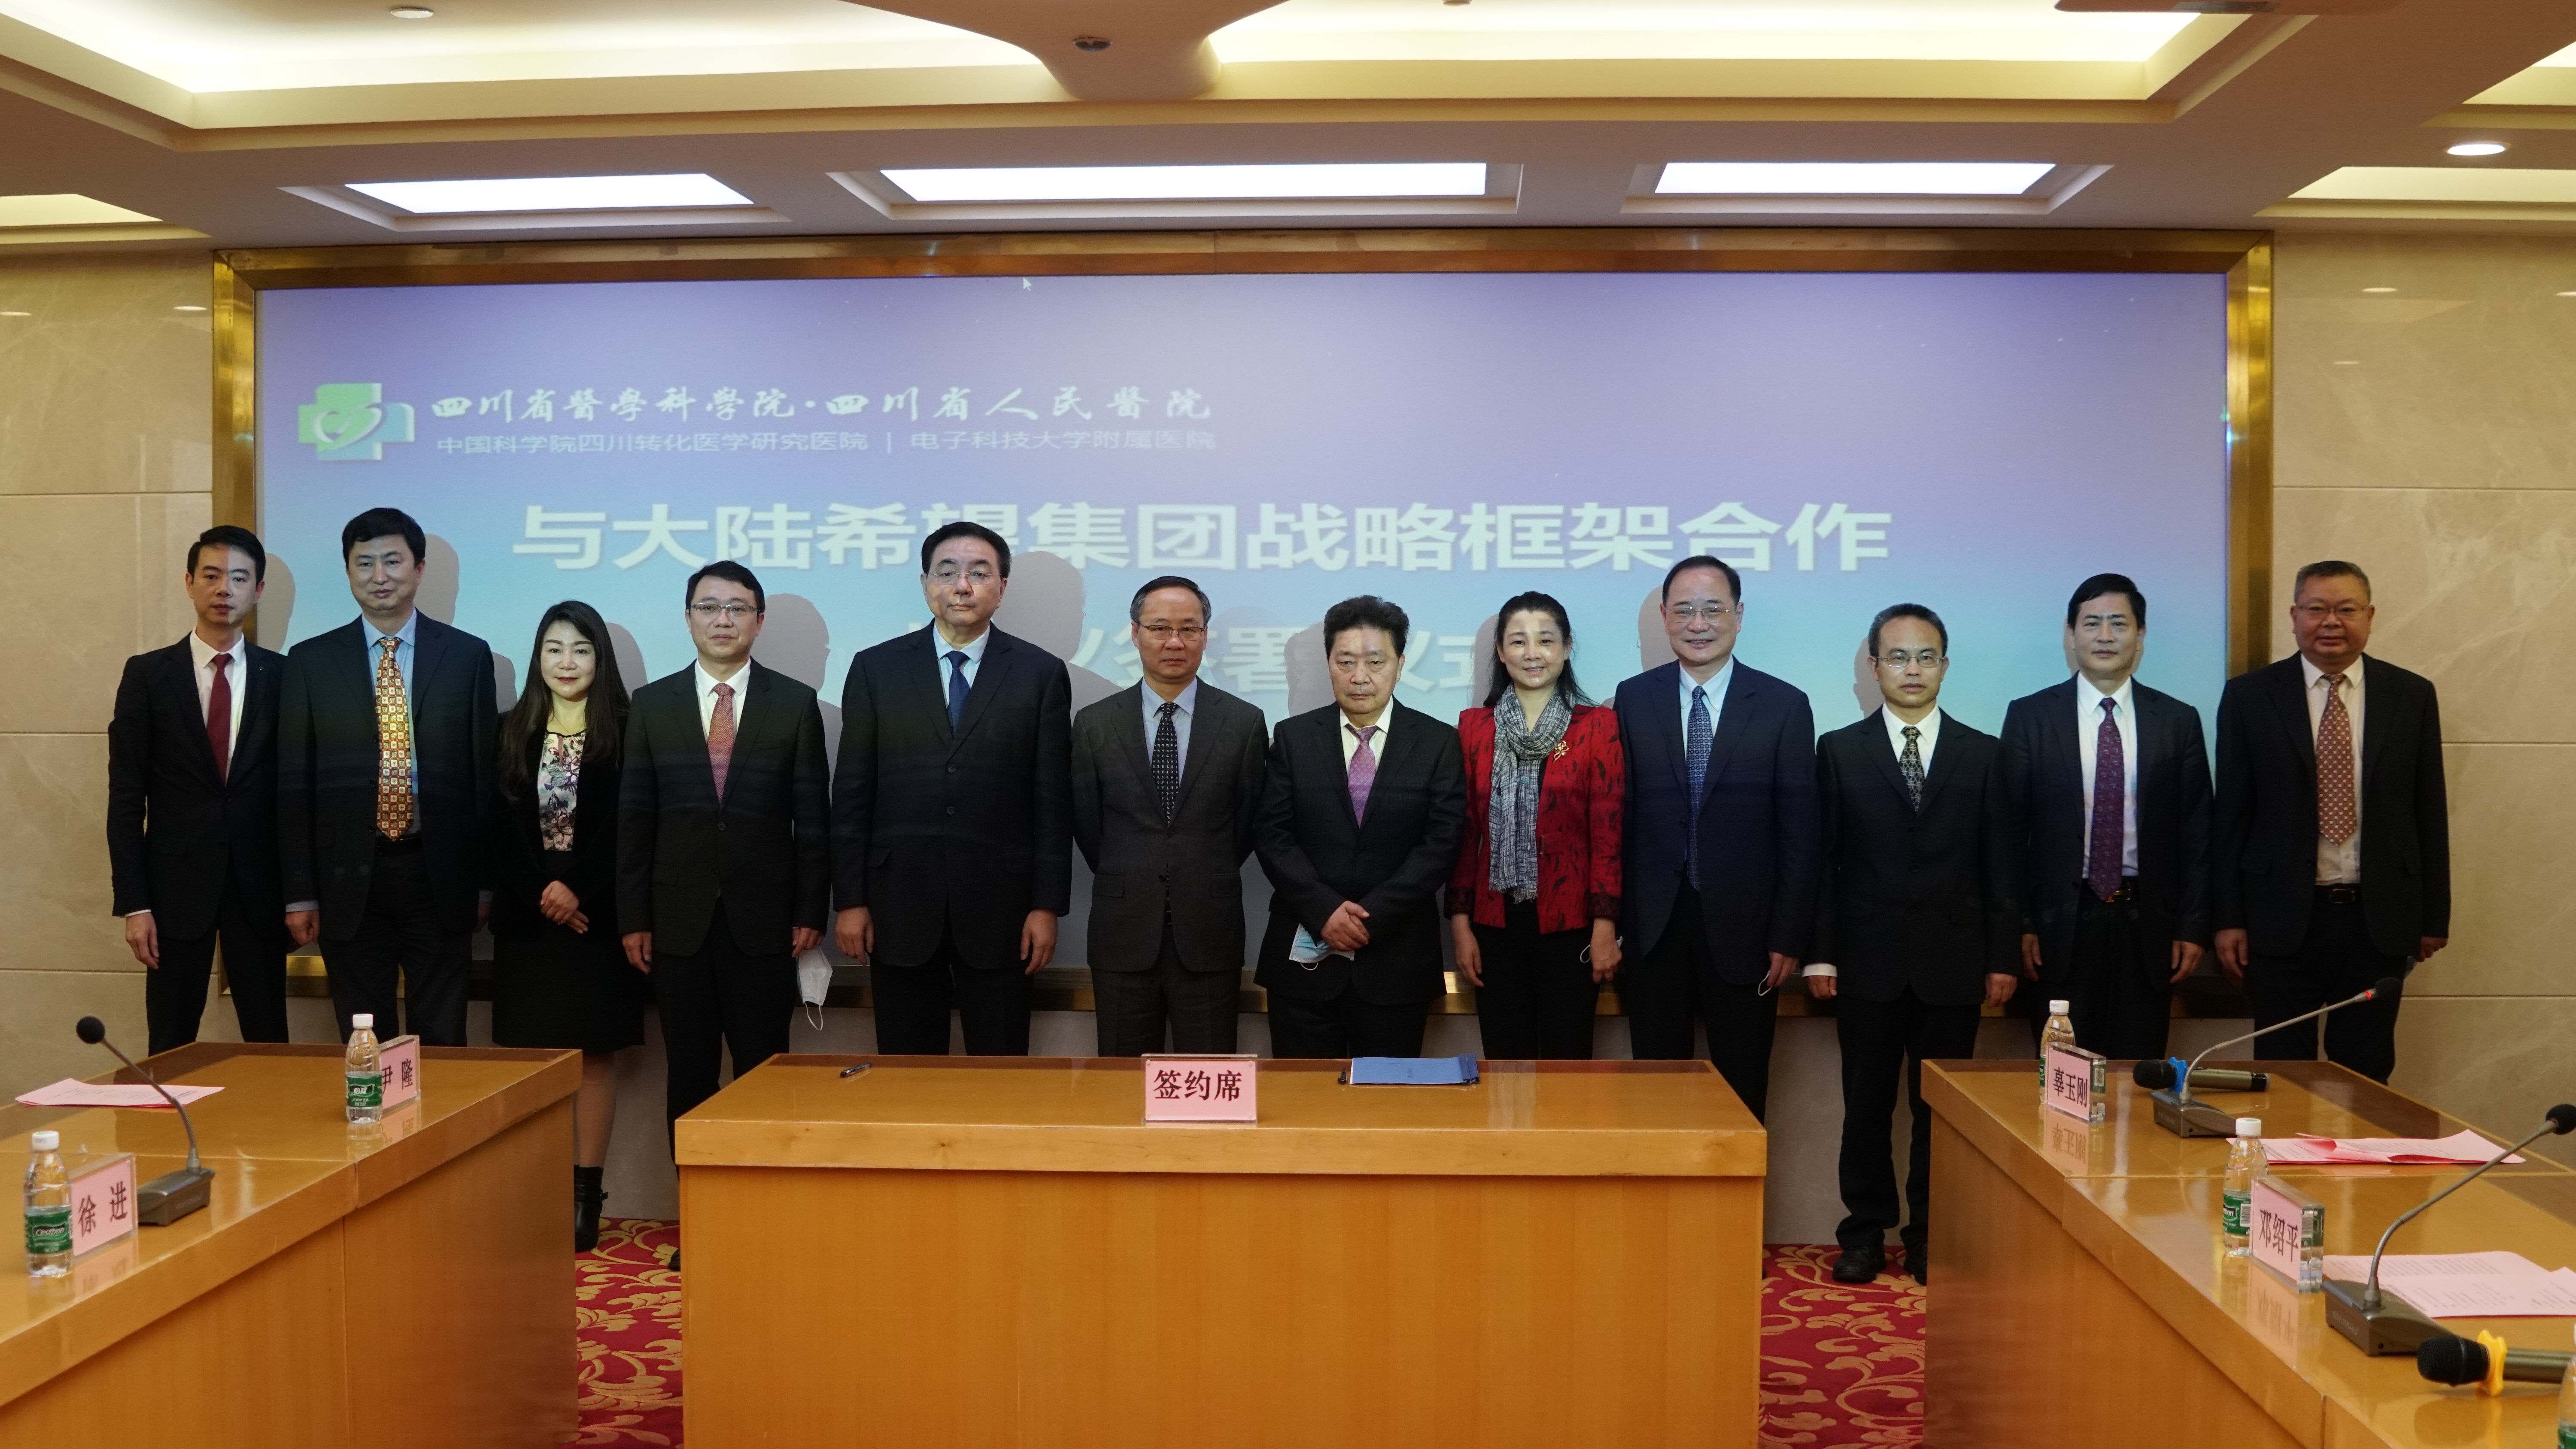 n April 18, 2020 Continental Hope Group and Sichuan Provincial People